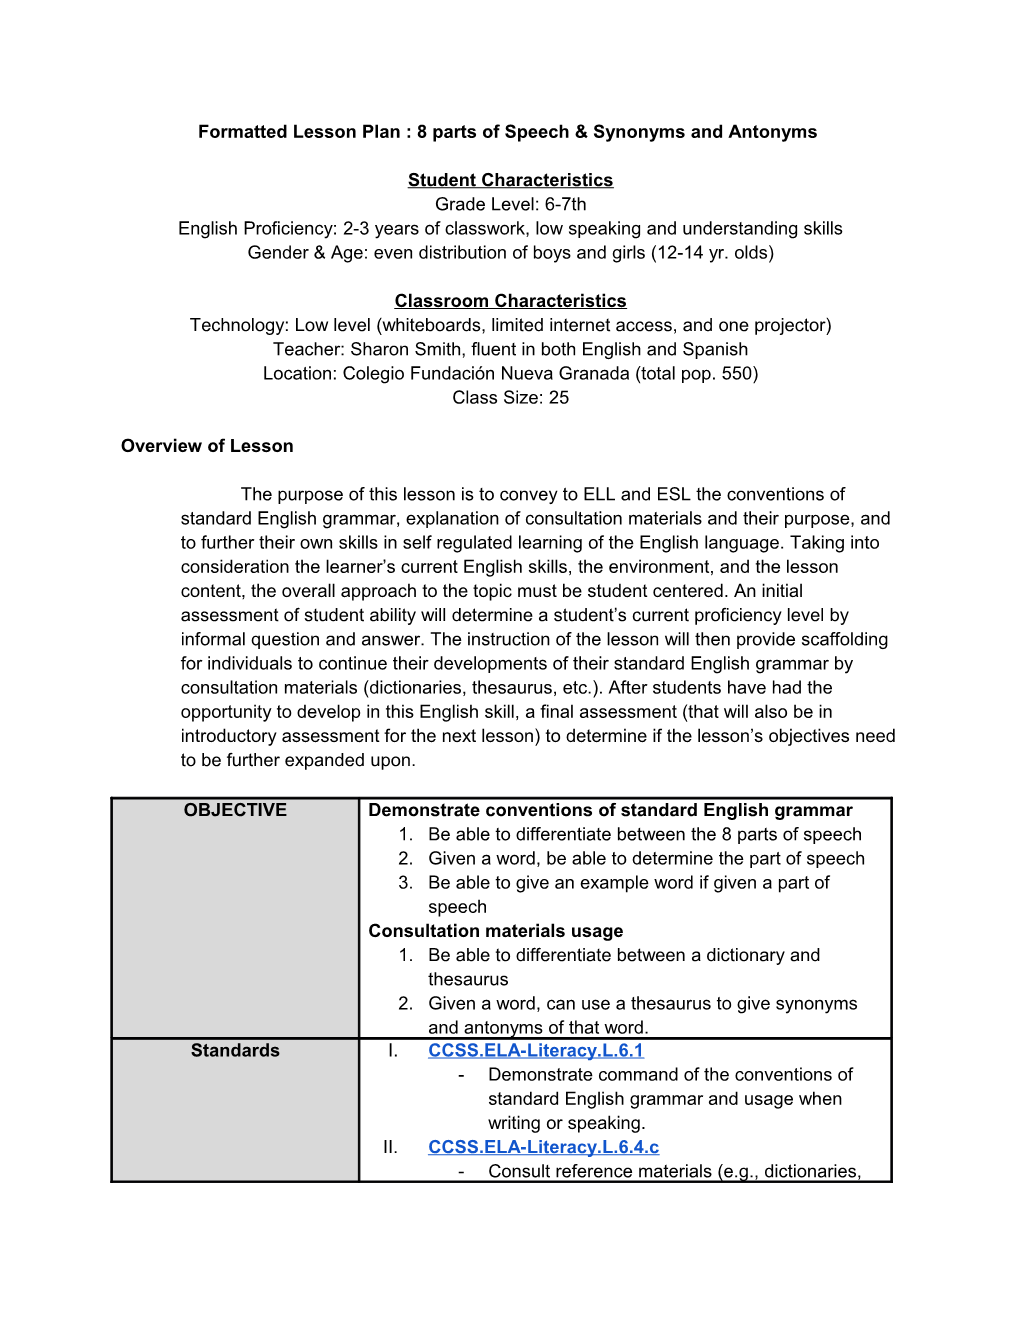 EDCI 270 Formatted Lesson Plan